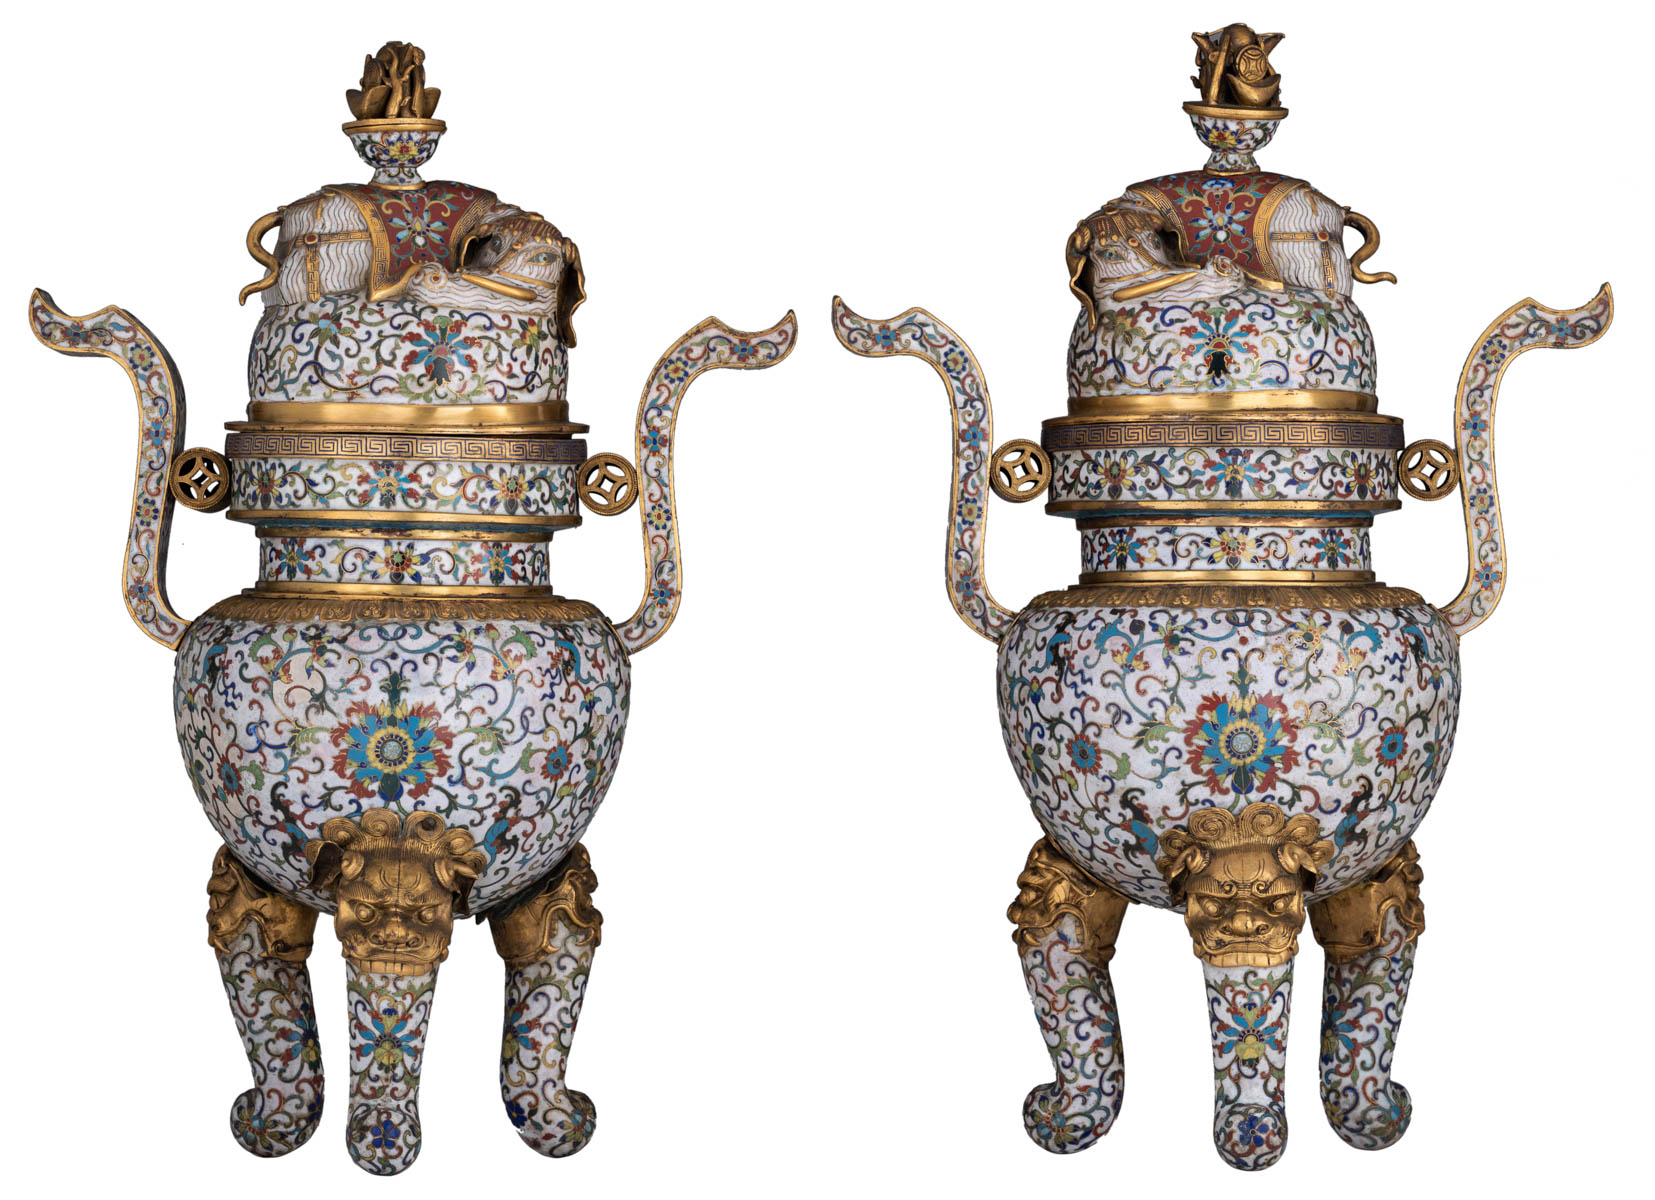 A pair of Chinese cloisonné enamel tripod censers and covers